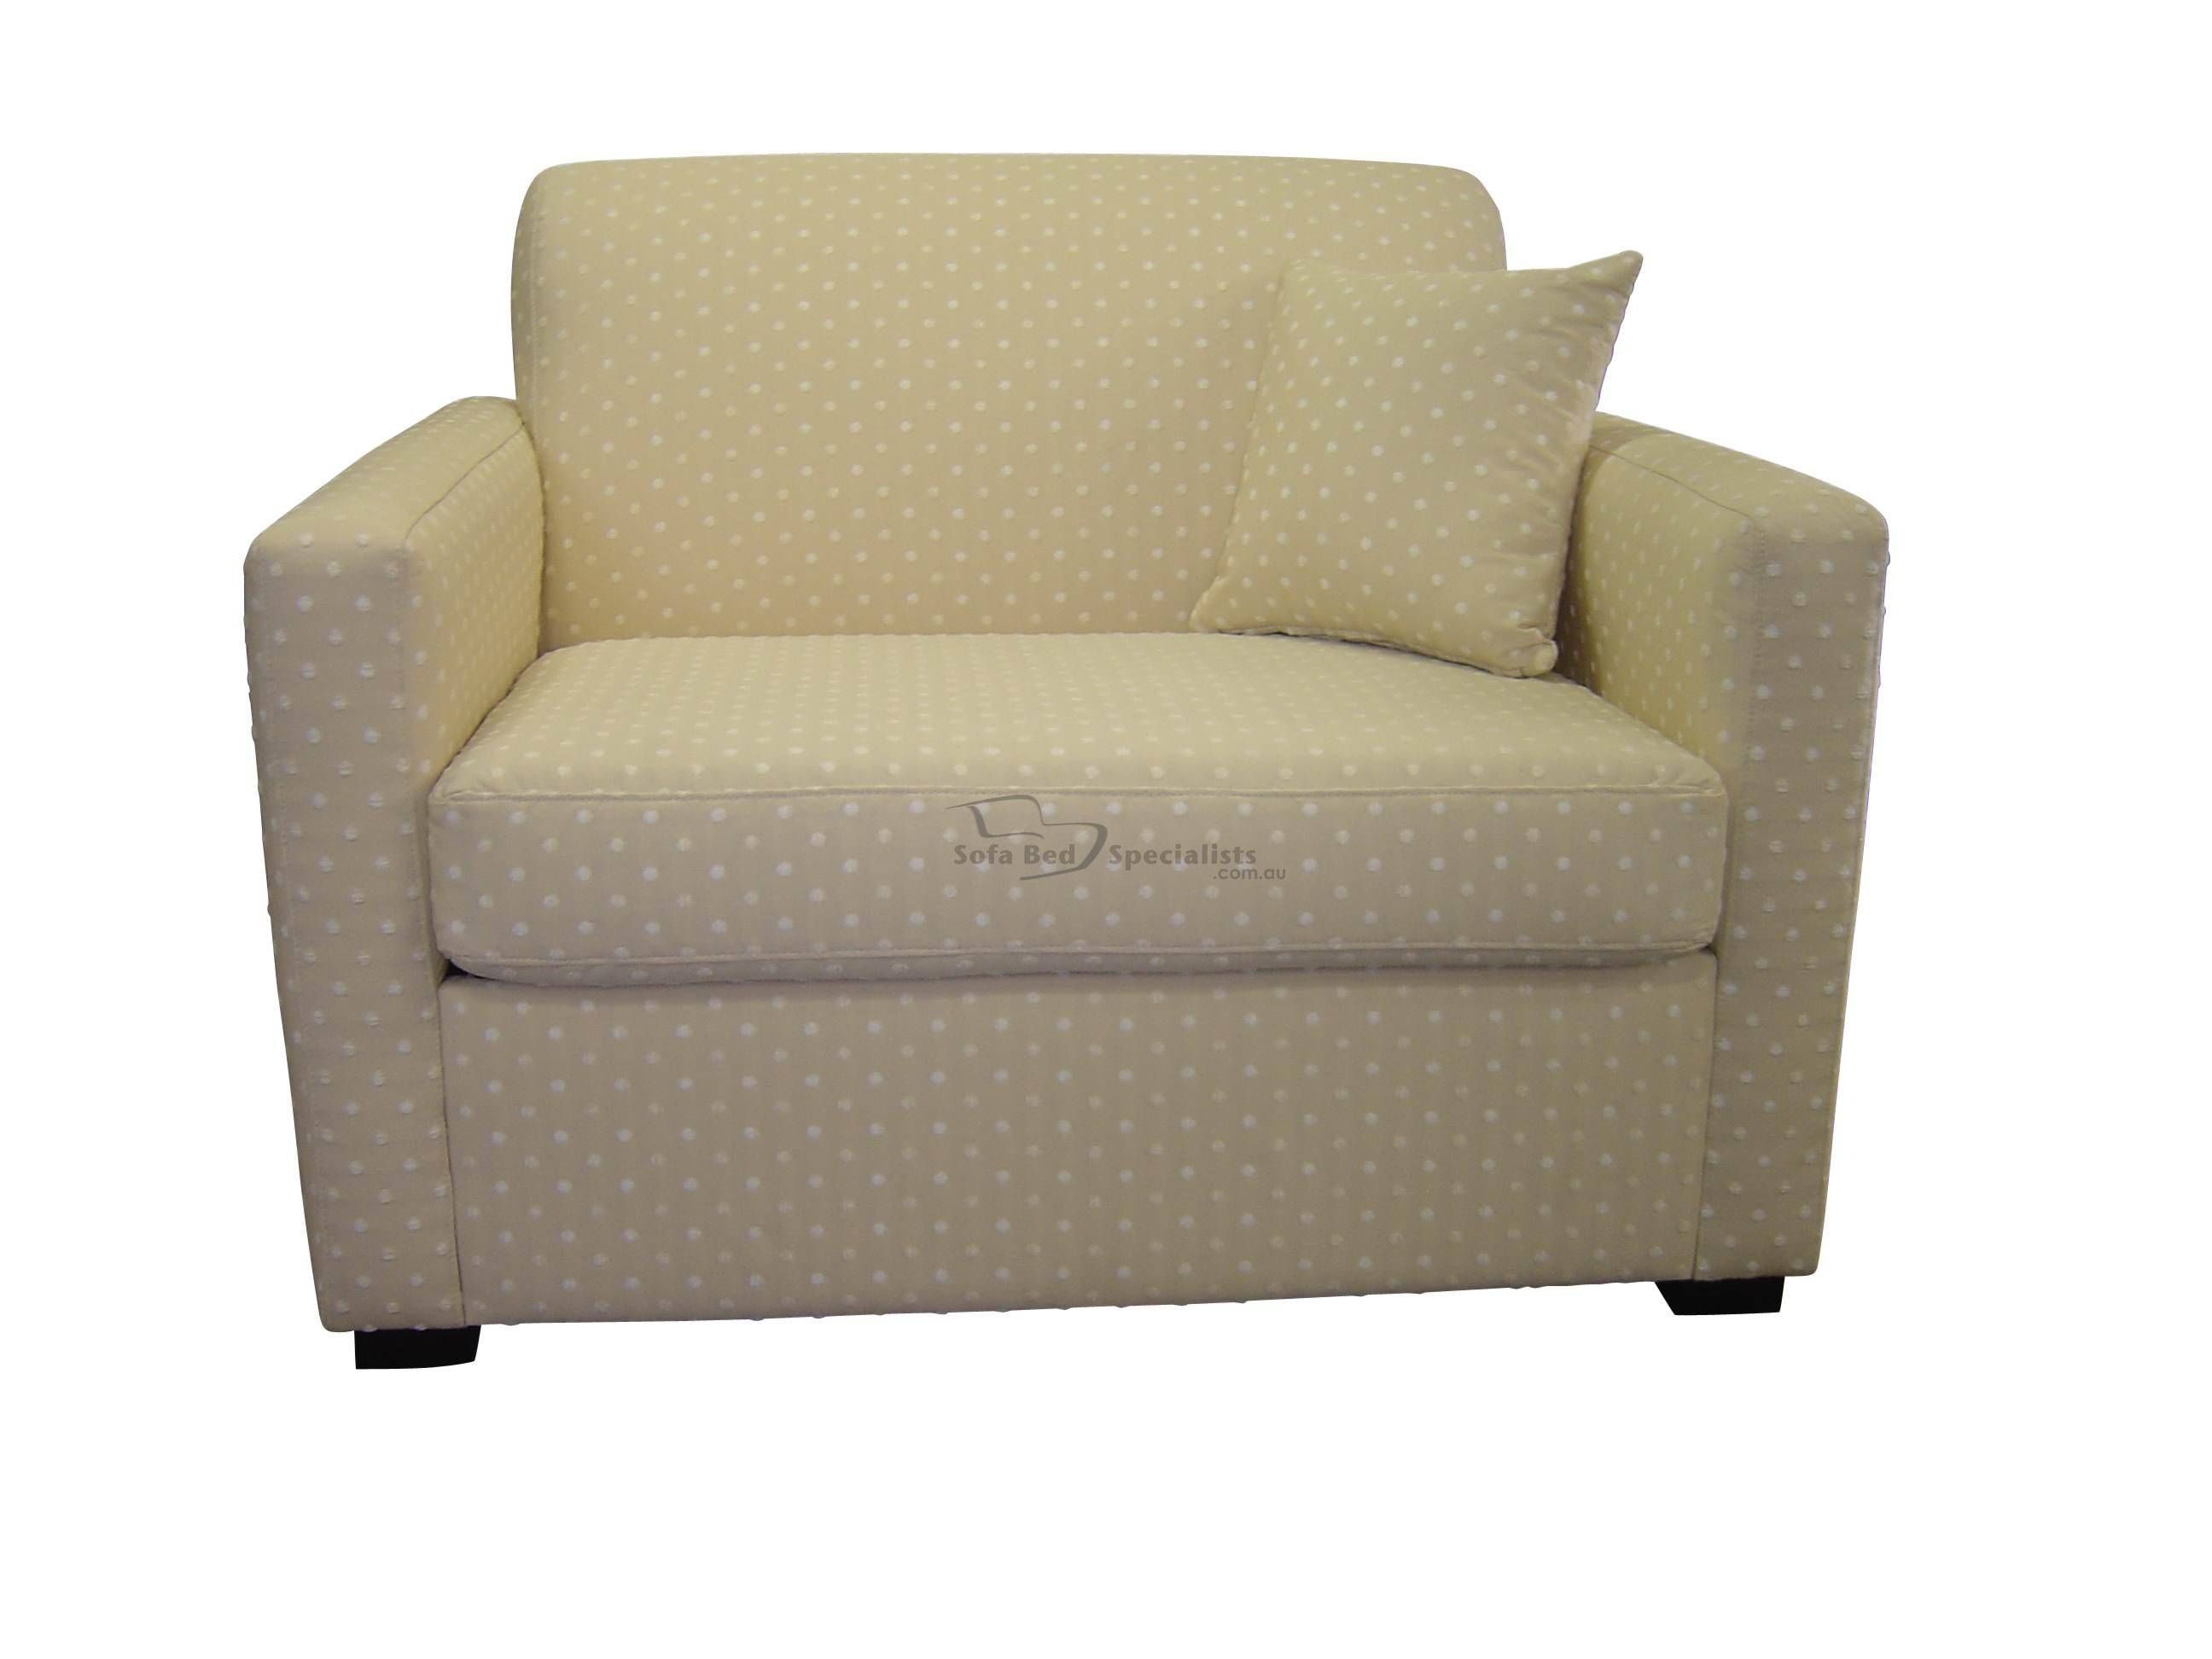 Chair Sofabed Bowman – Sofa Bed Specialists Pertaining To Single Sofa Bed Chairs (View 9 of 15)